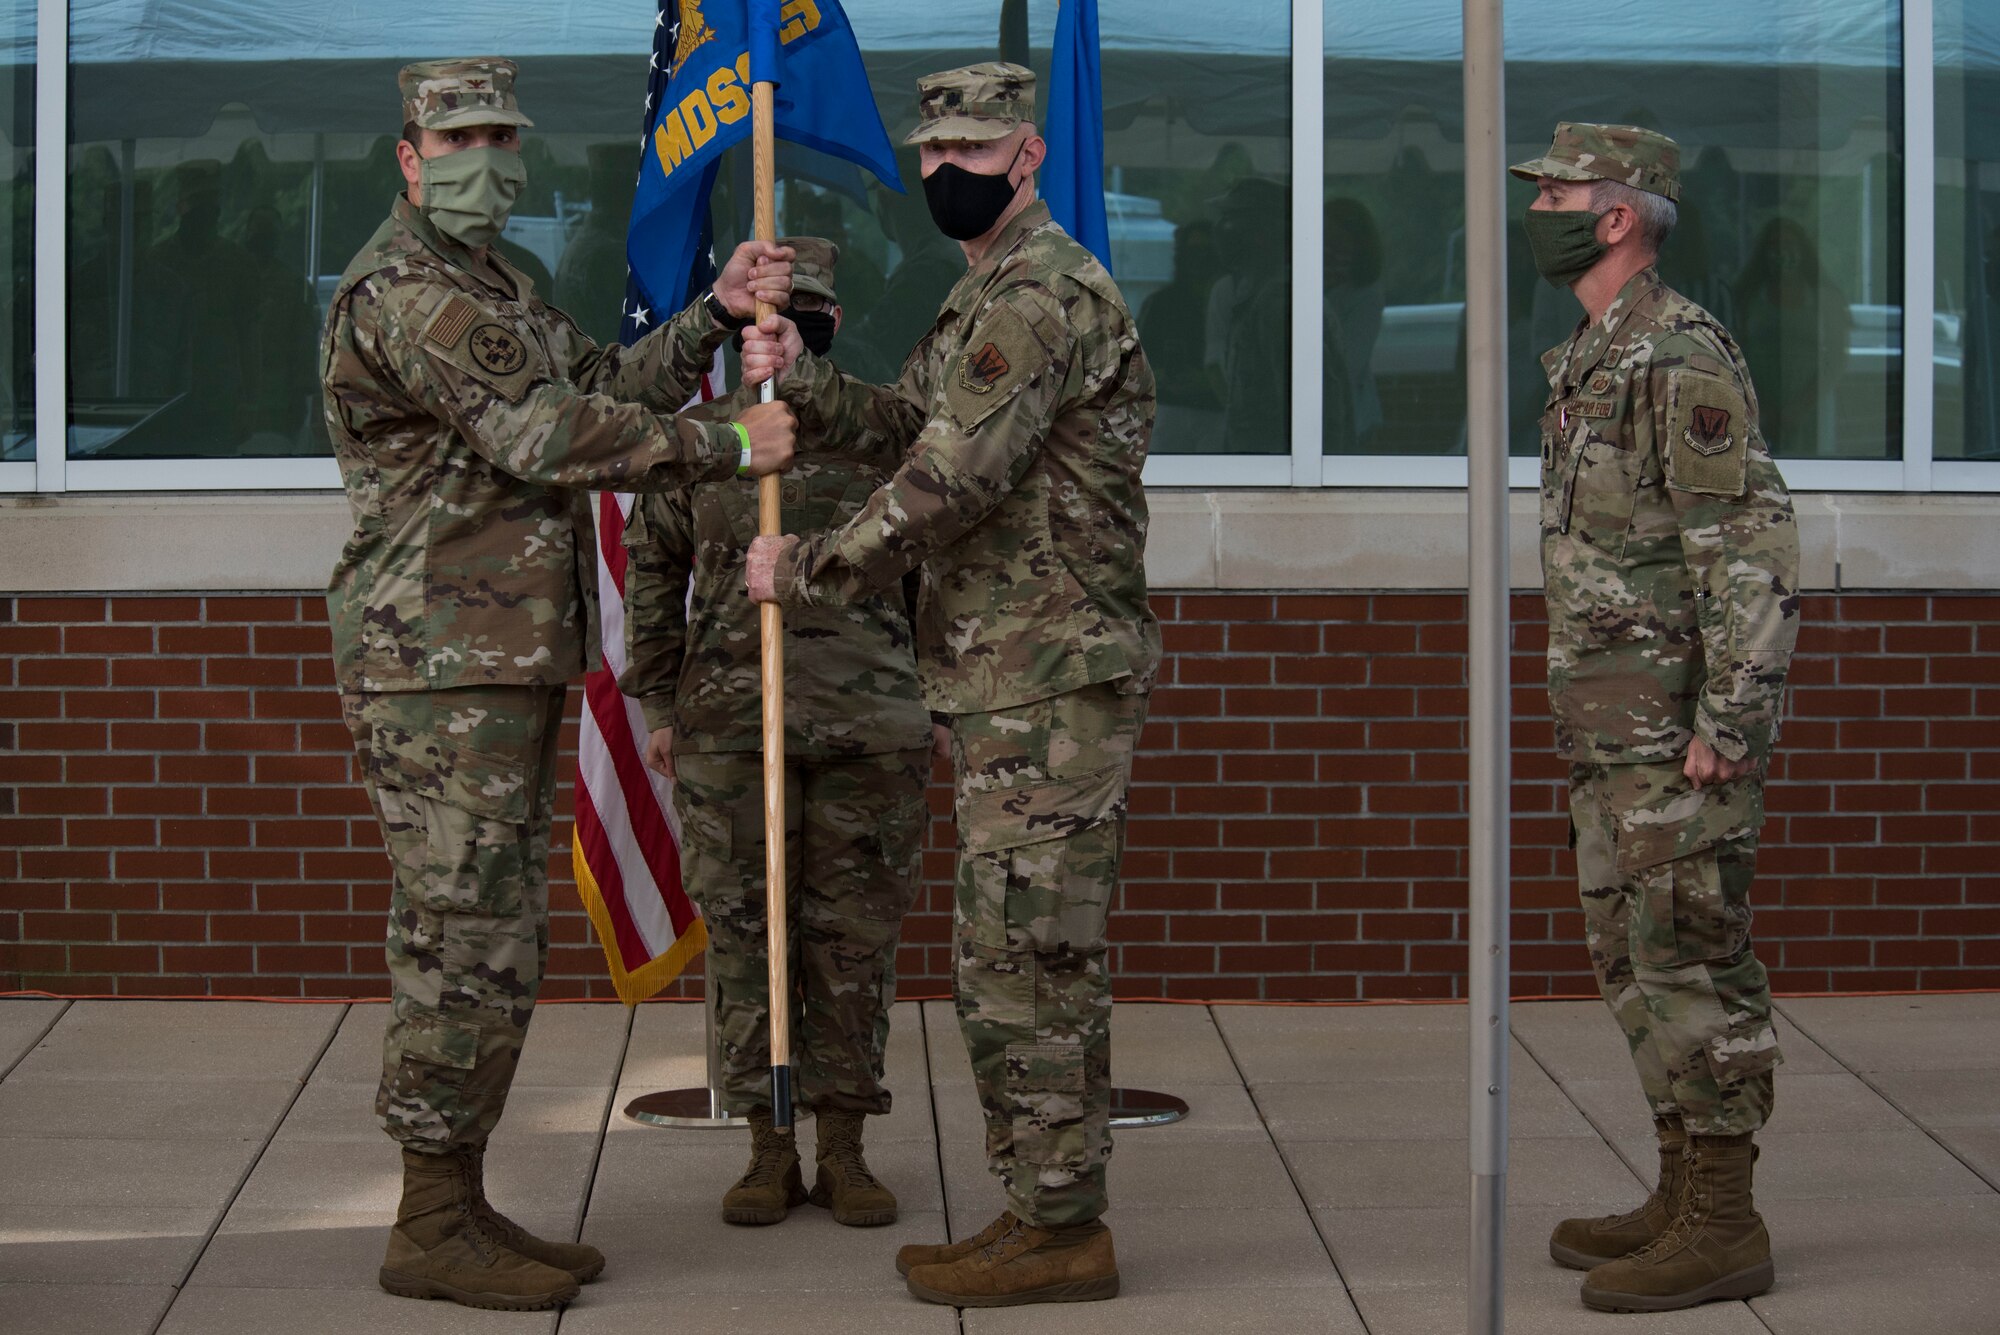 Col. William Malloy, 4th Medical Group commander, passes the guideon to Lt. Col. Joseph Popham, as Popham assumes command of the 4th Medical Support Squadron during a ceremony at the Thomas Koritz Clinic, Seymour Johnson Air Force Base, North Carolina, June 23, 2020. Popham arrived from Joint Base San Antonio Lackland, Texas. (U.S. Air Force photo by Senior Airman Kenneth Boyton)